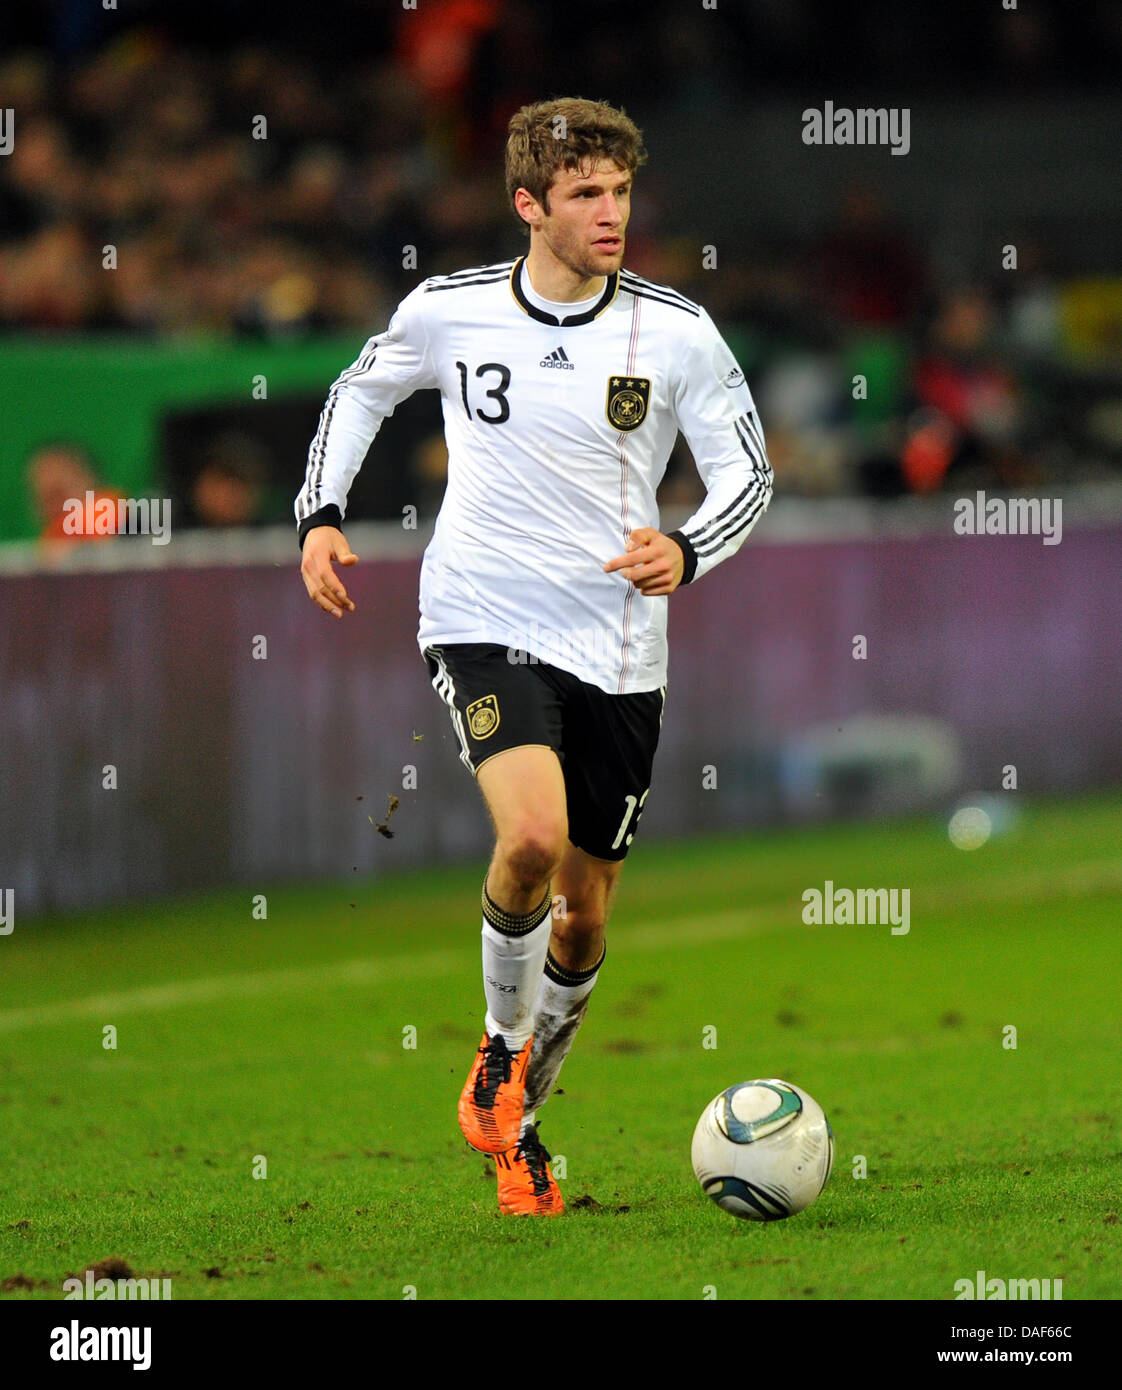 Page 3 - Thomas Muller High Resolution Stock Photography and Images - Alamy